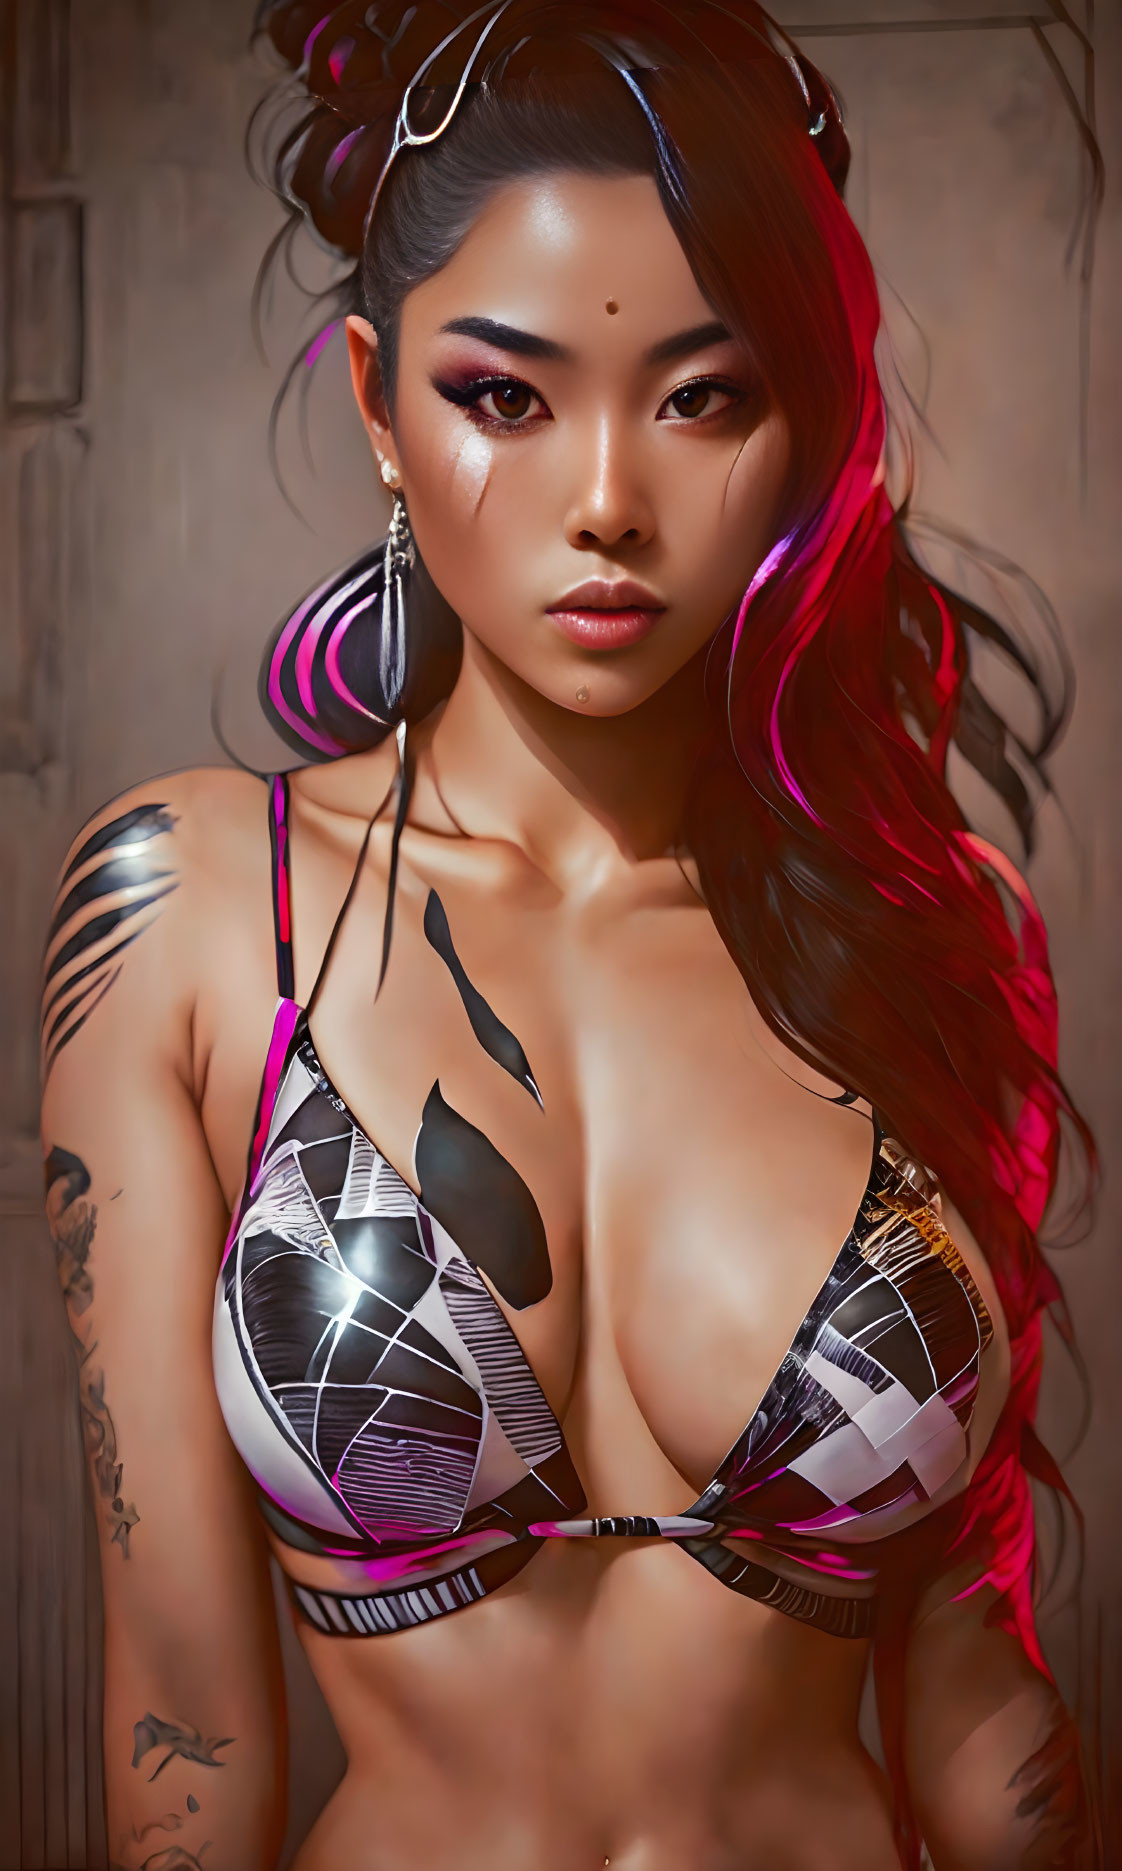 Woman with bikini body paint and bold makeup, red-streaked hair, and hoop earrings.